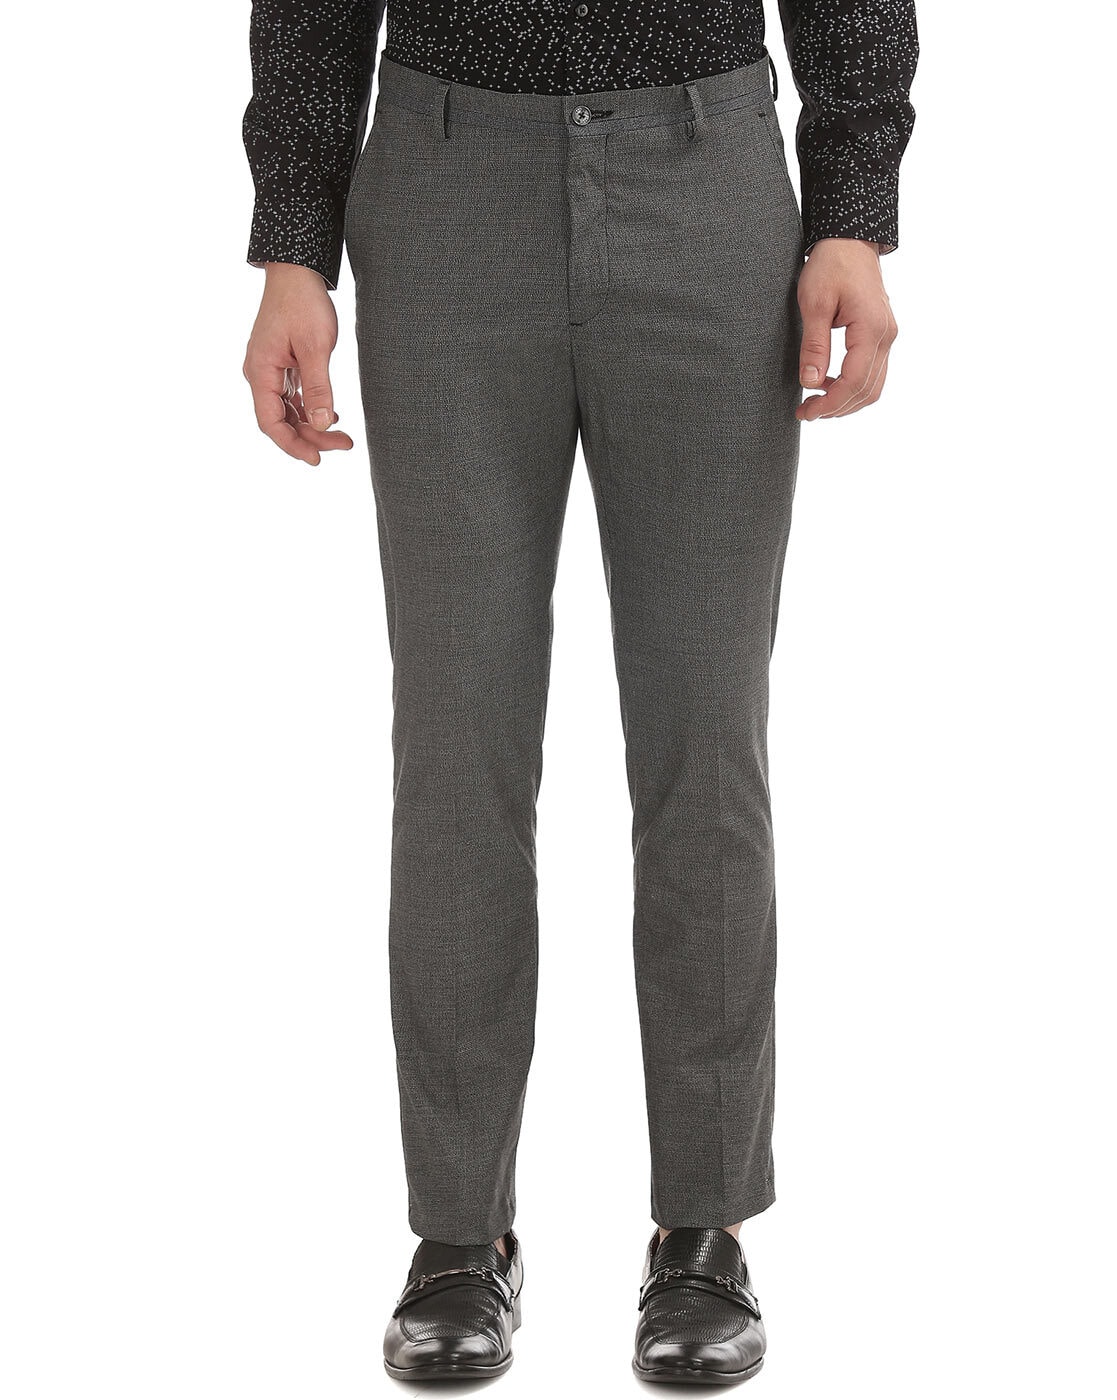 Buy Stylish Formal Pants for Men Online in India